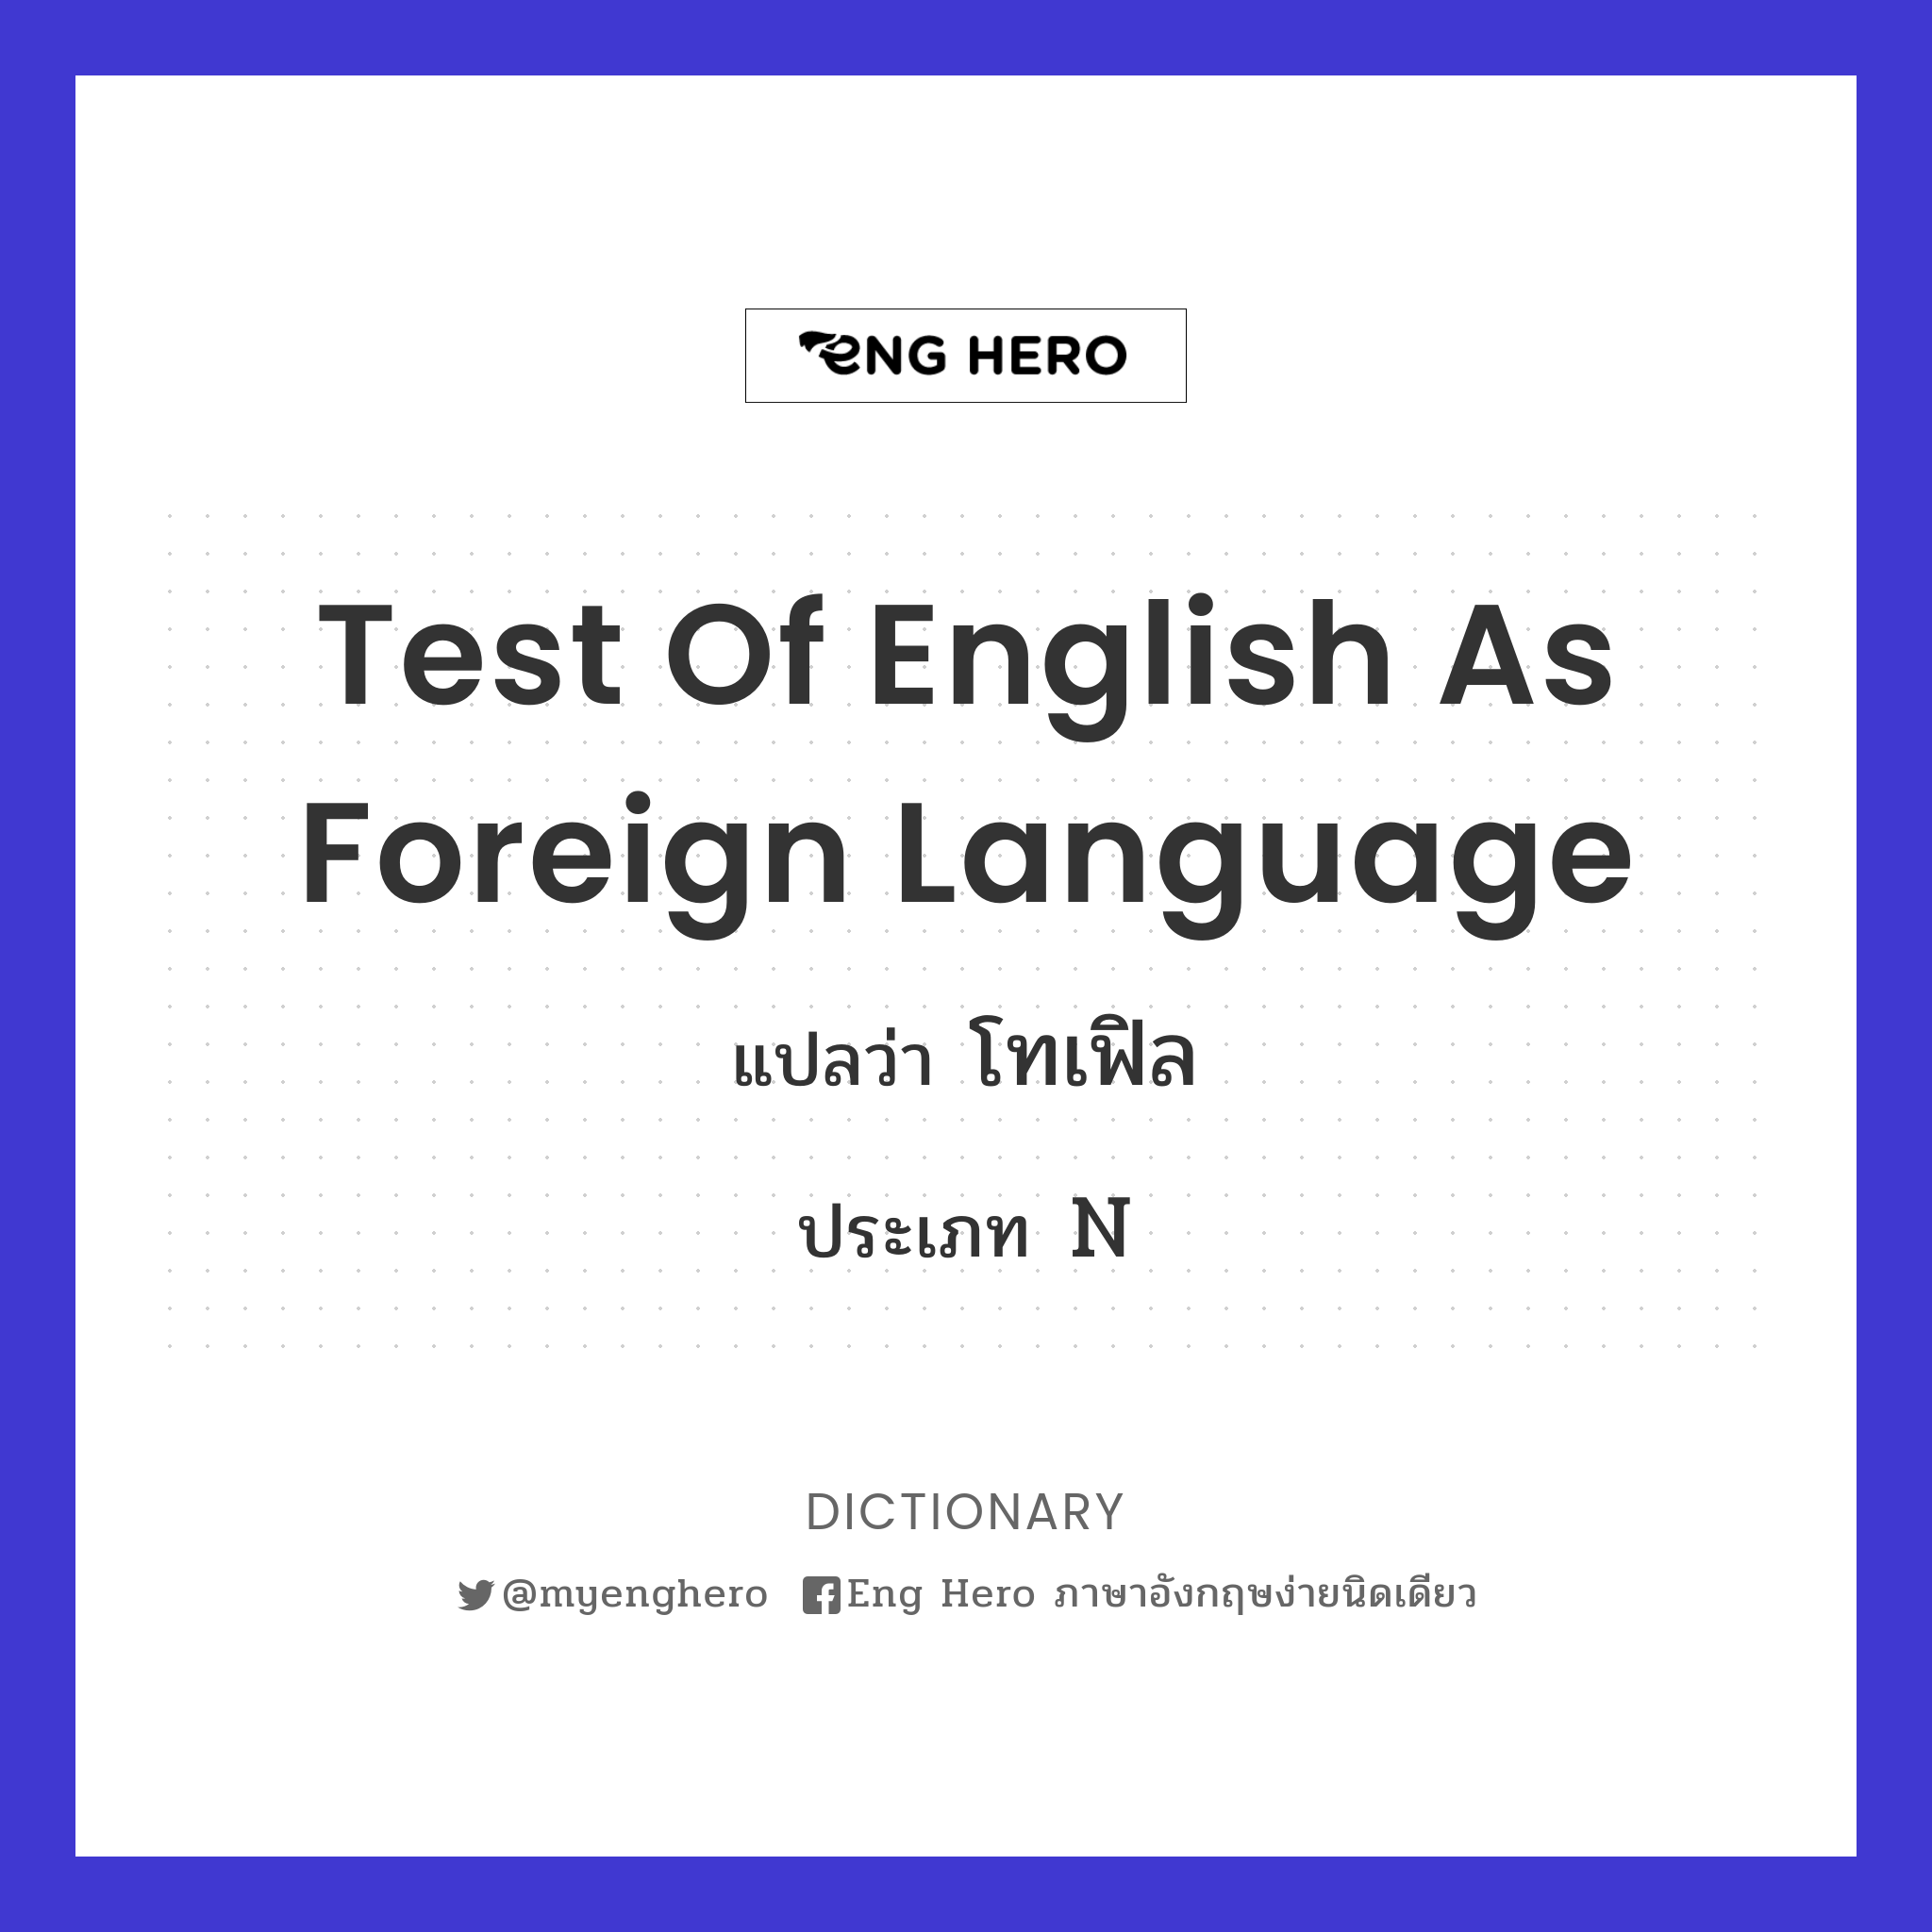 Test of English as Foreign Language